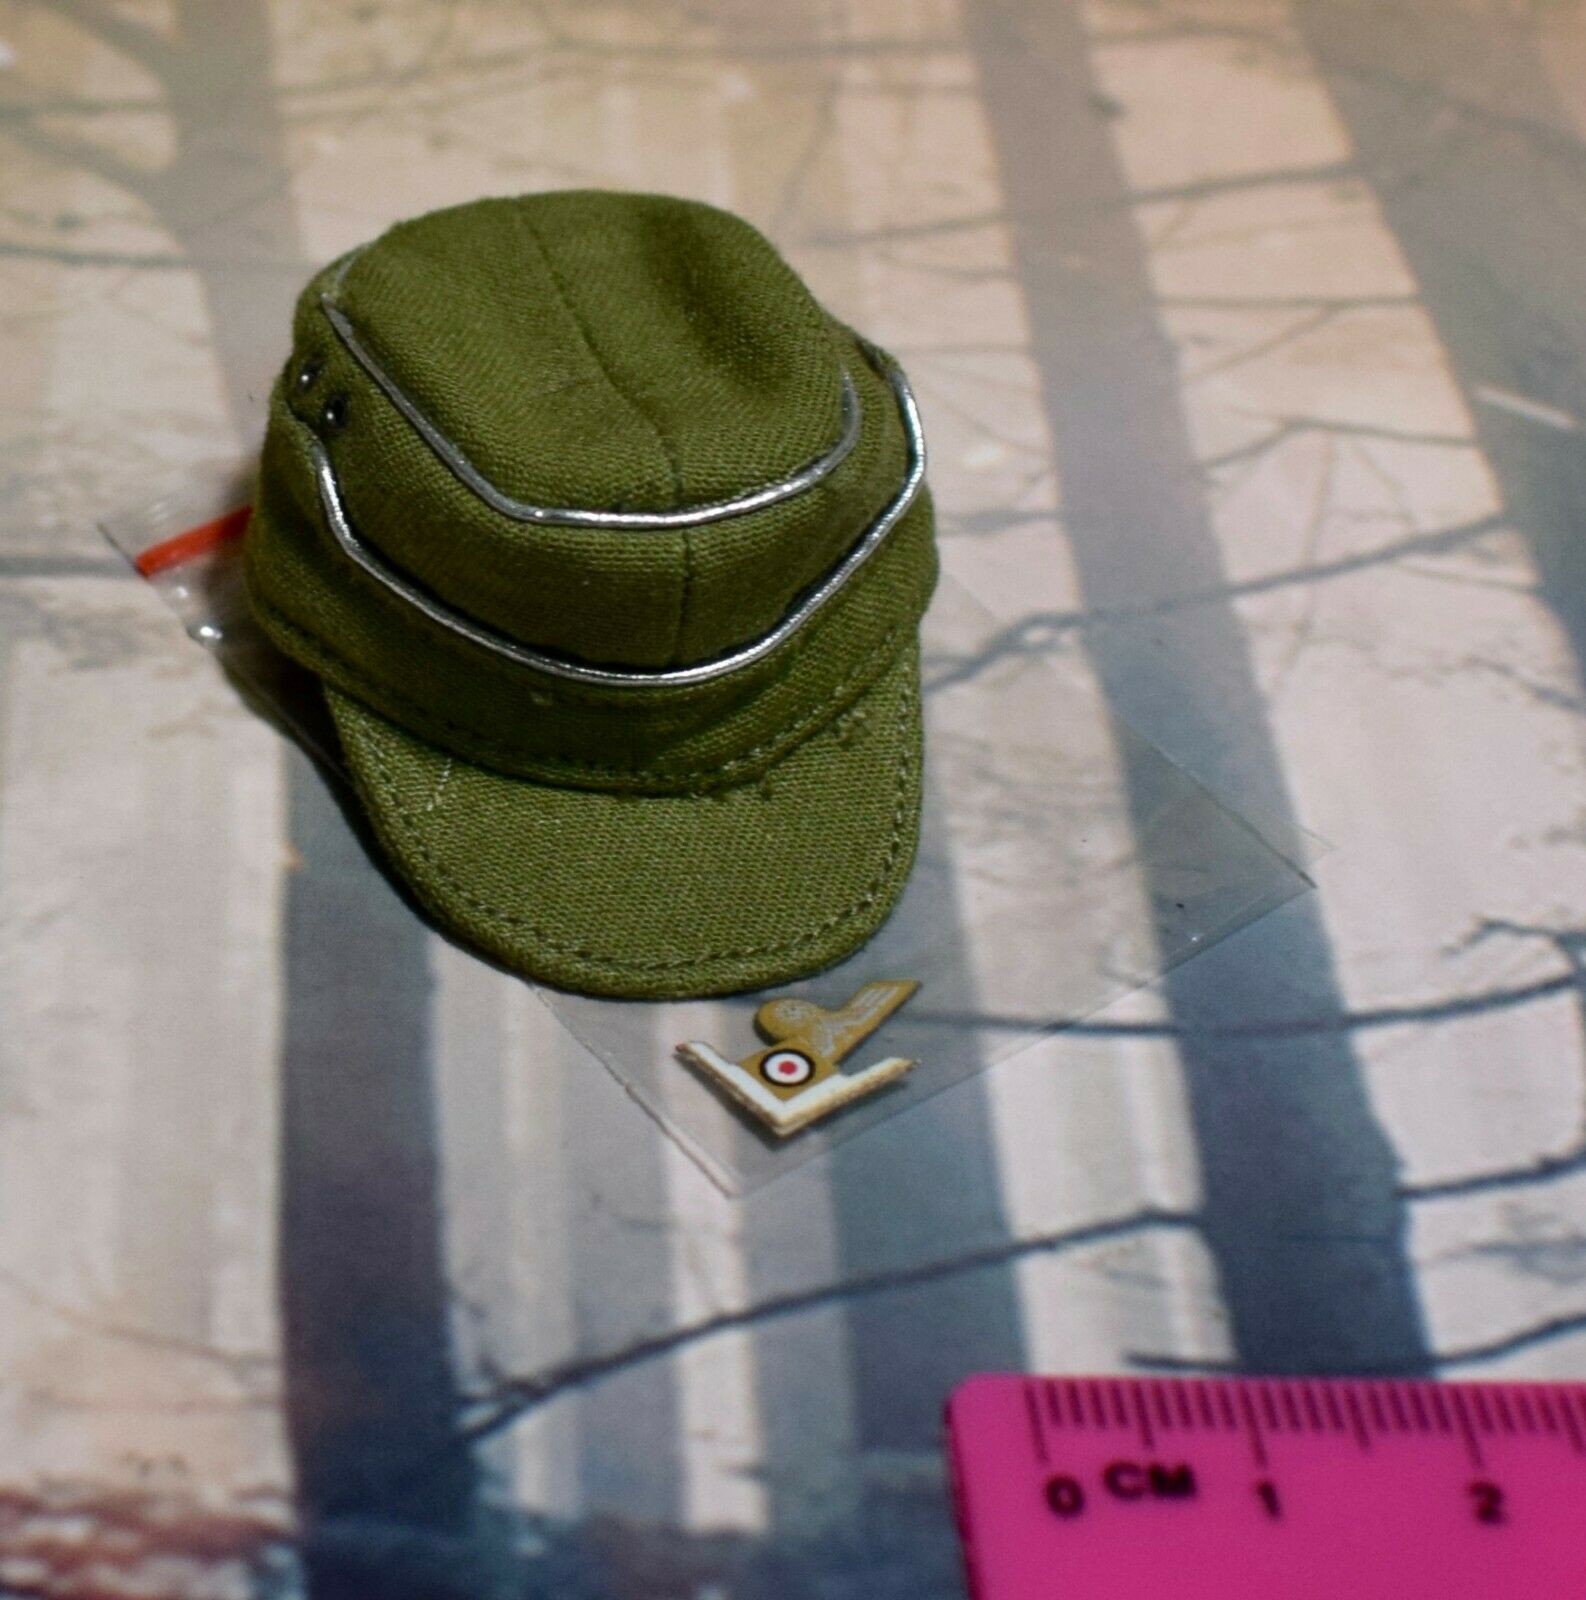 Dragon In Dreams DID 1/6 Scale WWII German Cap from Wilhelm D80151